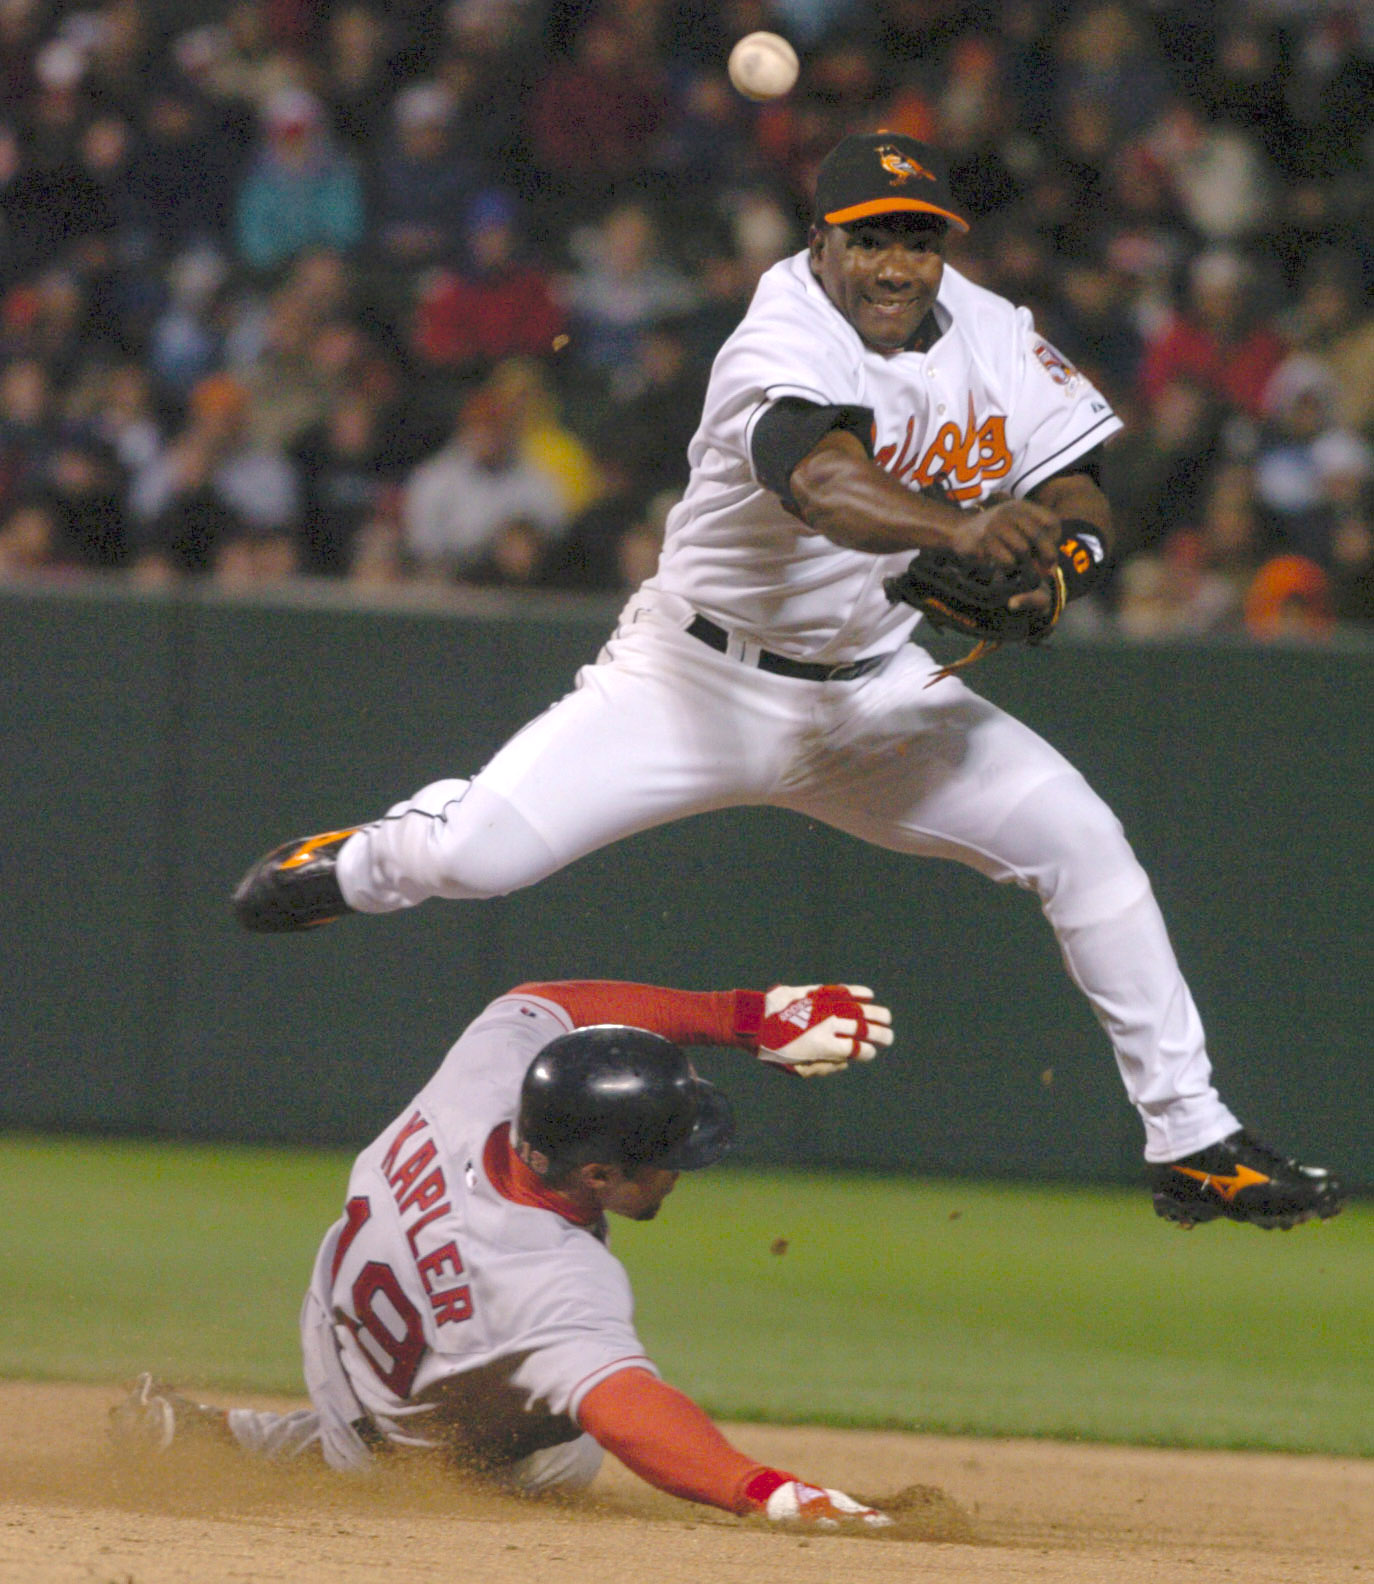 BALTIMORE , MD -- 4/4/04 - The Baltimore Orioles host the Boston Red Sox in their Opening Day game. Miquel Tejada turns a double play in the top of the 6th inning throwing out Jason Varitek as Boston's Gabe Kapler slides underneath him.Baltimore Sun Staff/ELIZABETH MALBY DIGITAL IMAGE #DSC_0005